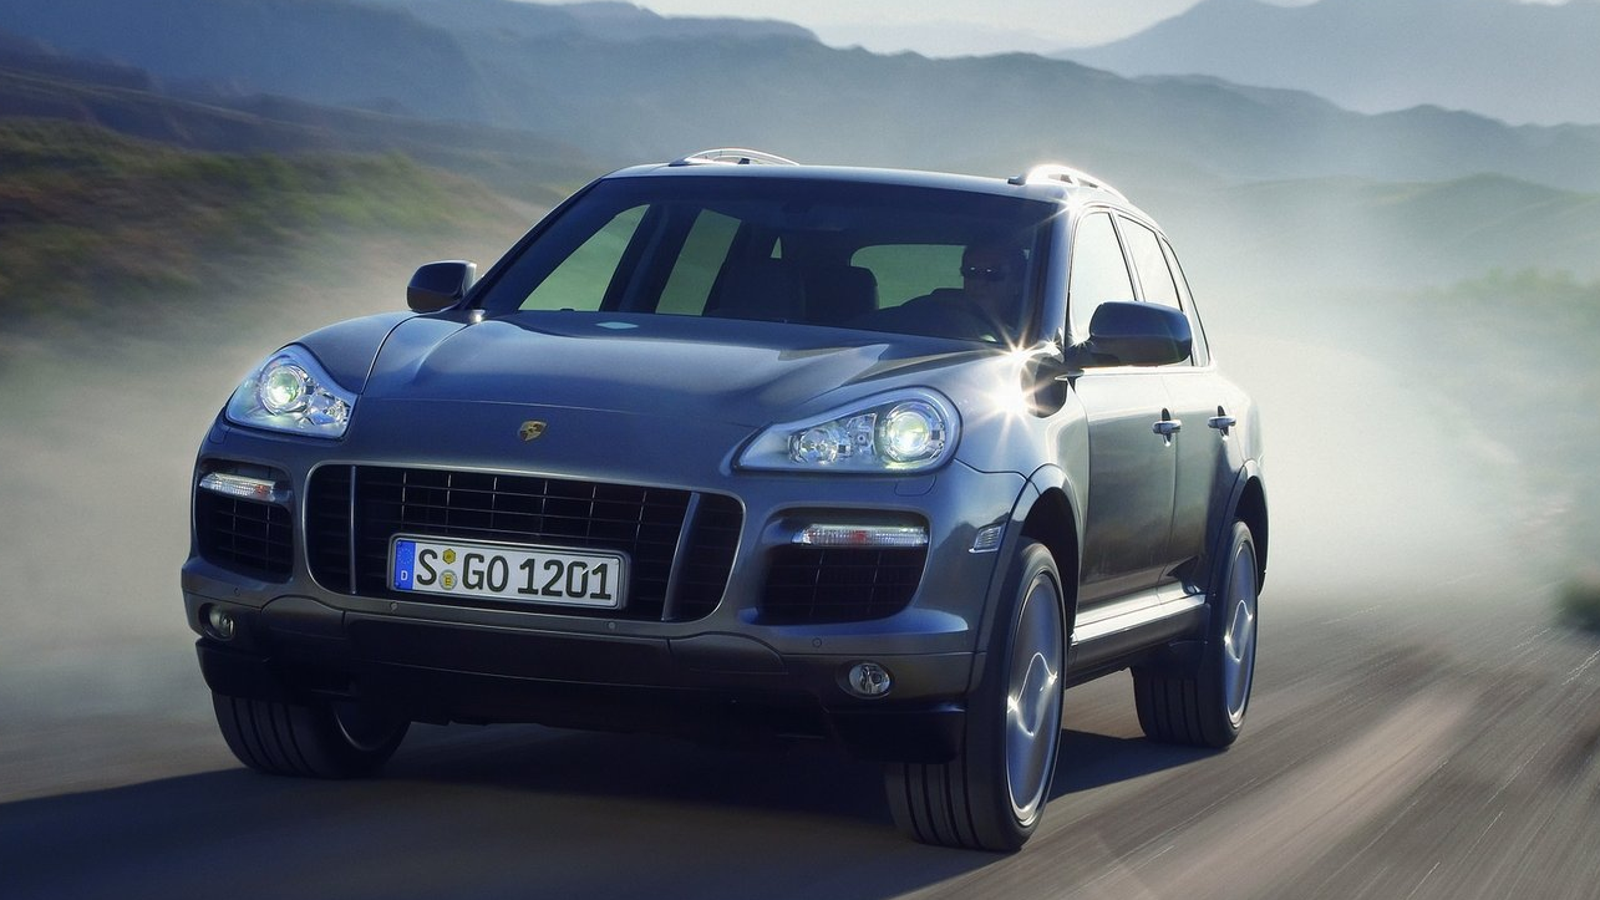 Here Are Ten Of The Best Luxury SUVs On eBay For Less Than $30,000